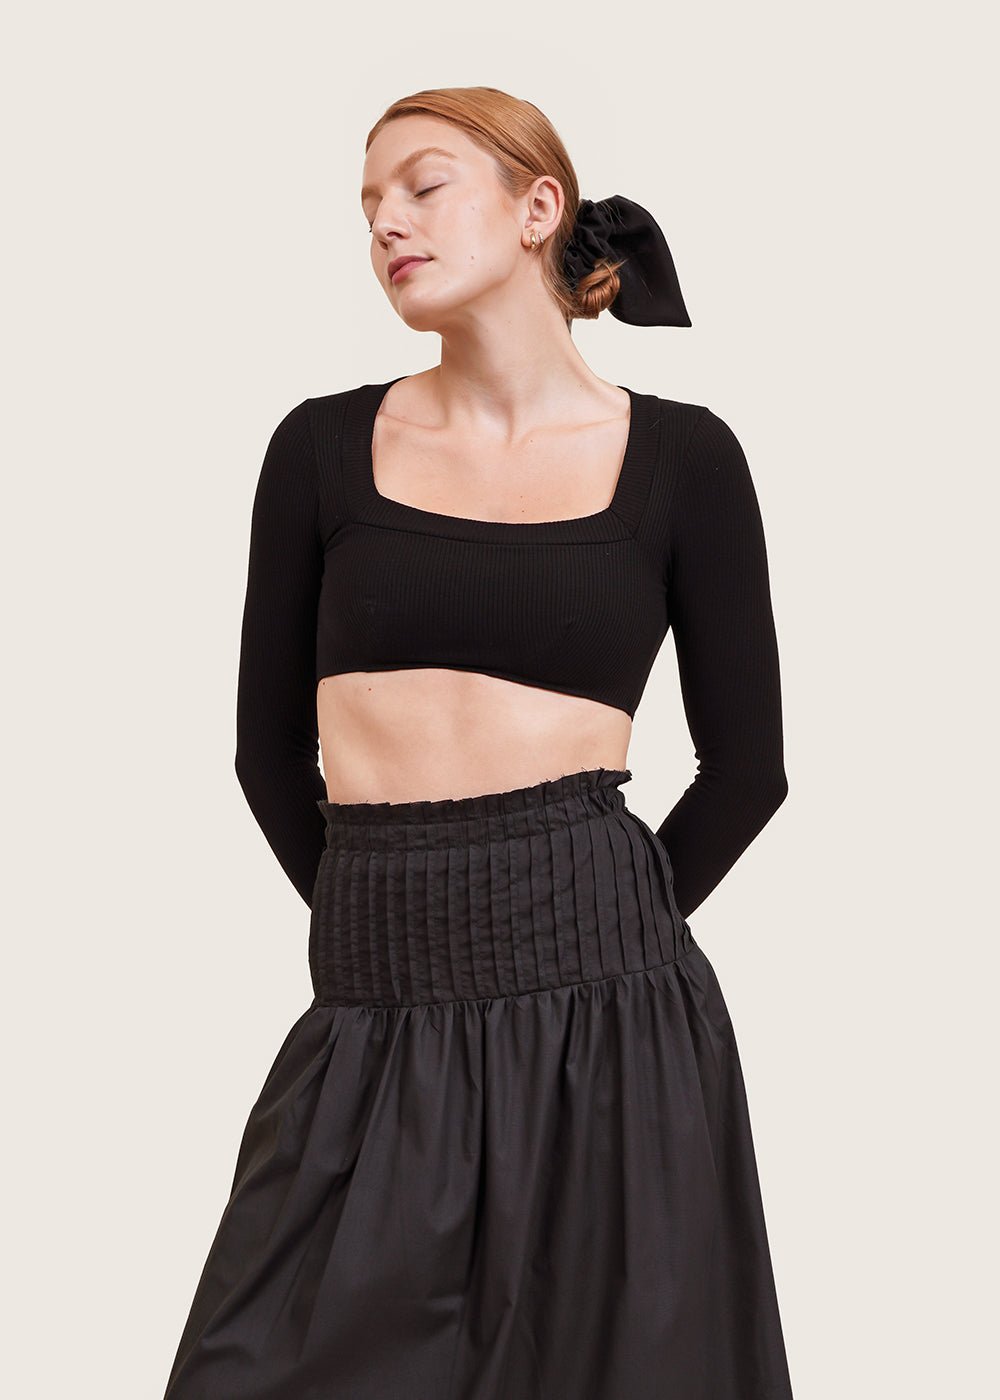 Angie Bauer Black Catherine Top - New Classics Studios Sustainable Ethical Fashion Canada